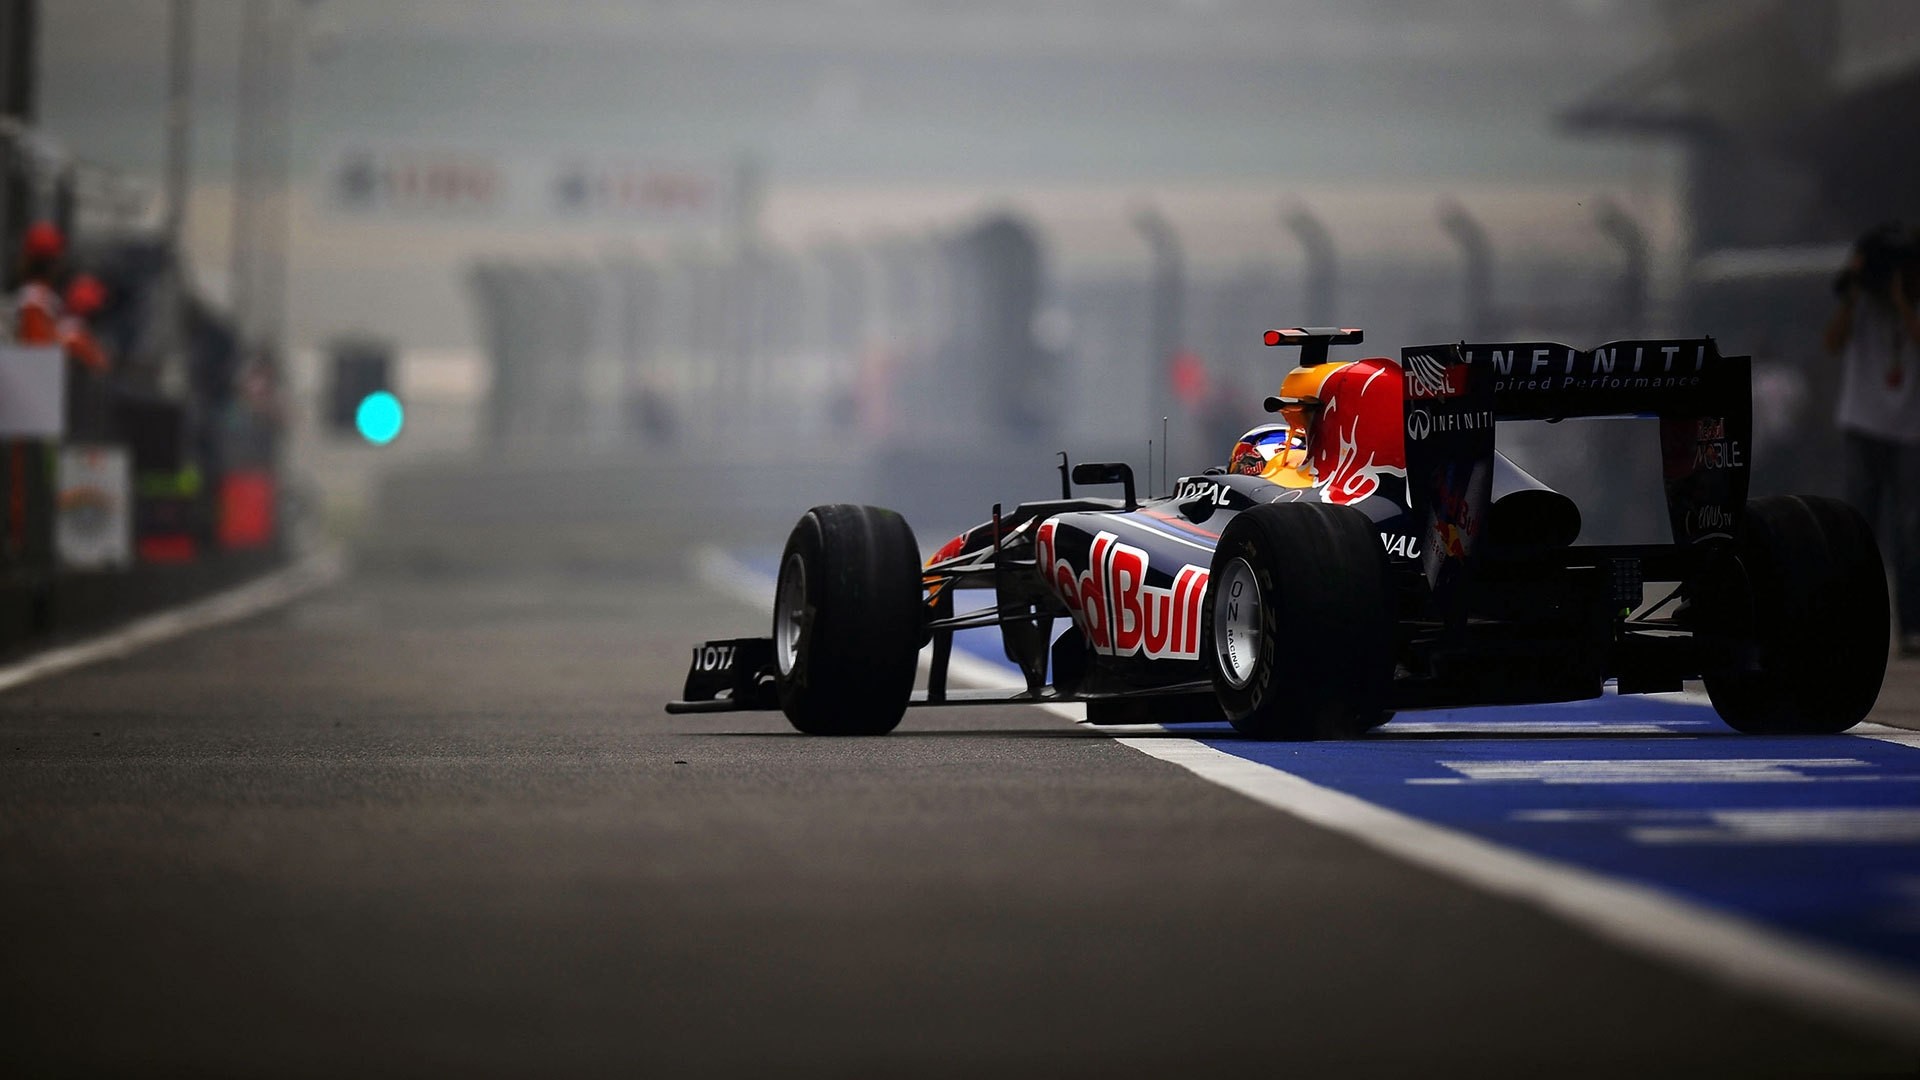 Over 50 Formula One Cars F1 Wallpapers in HD For Download 1920x1080